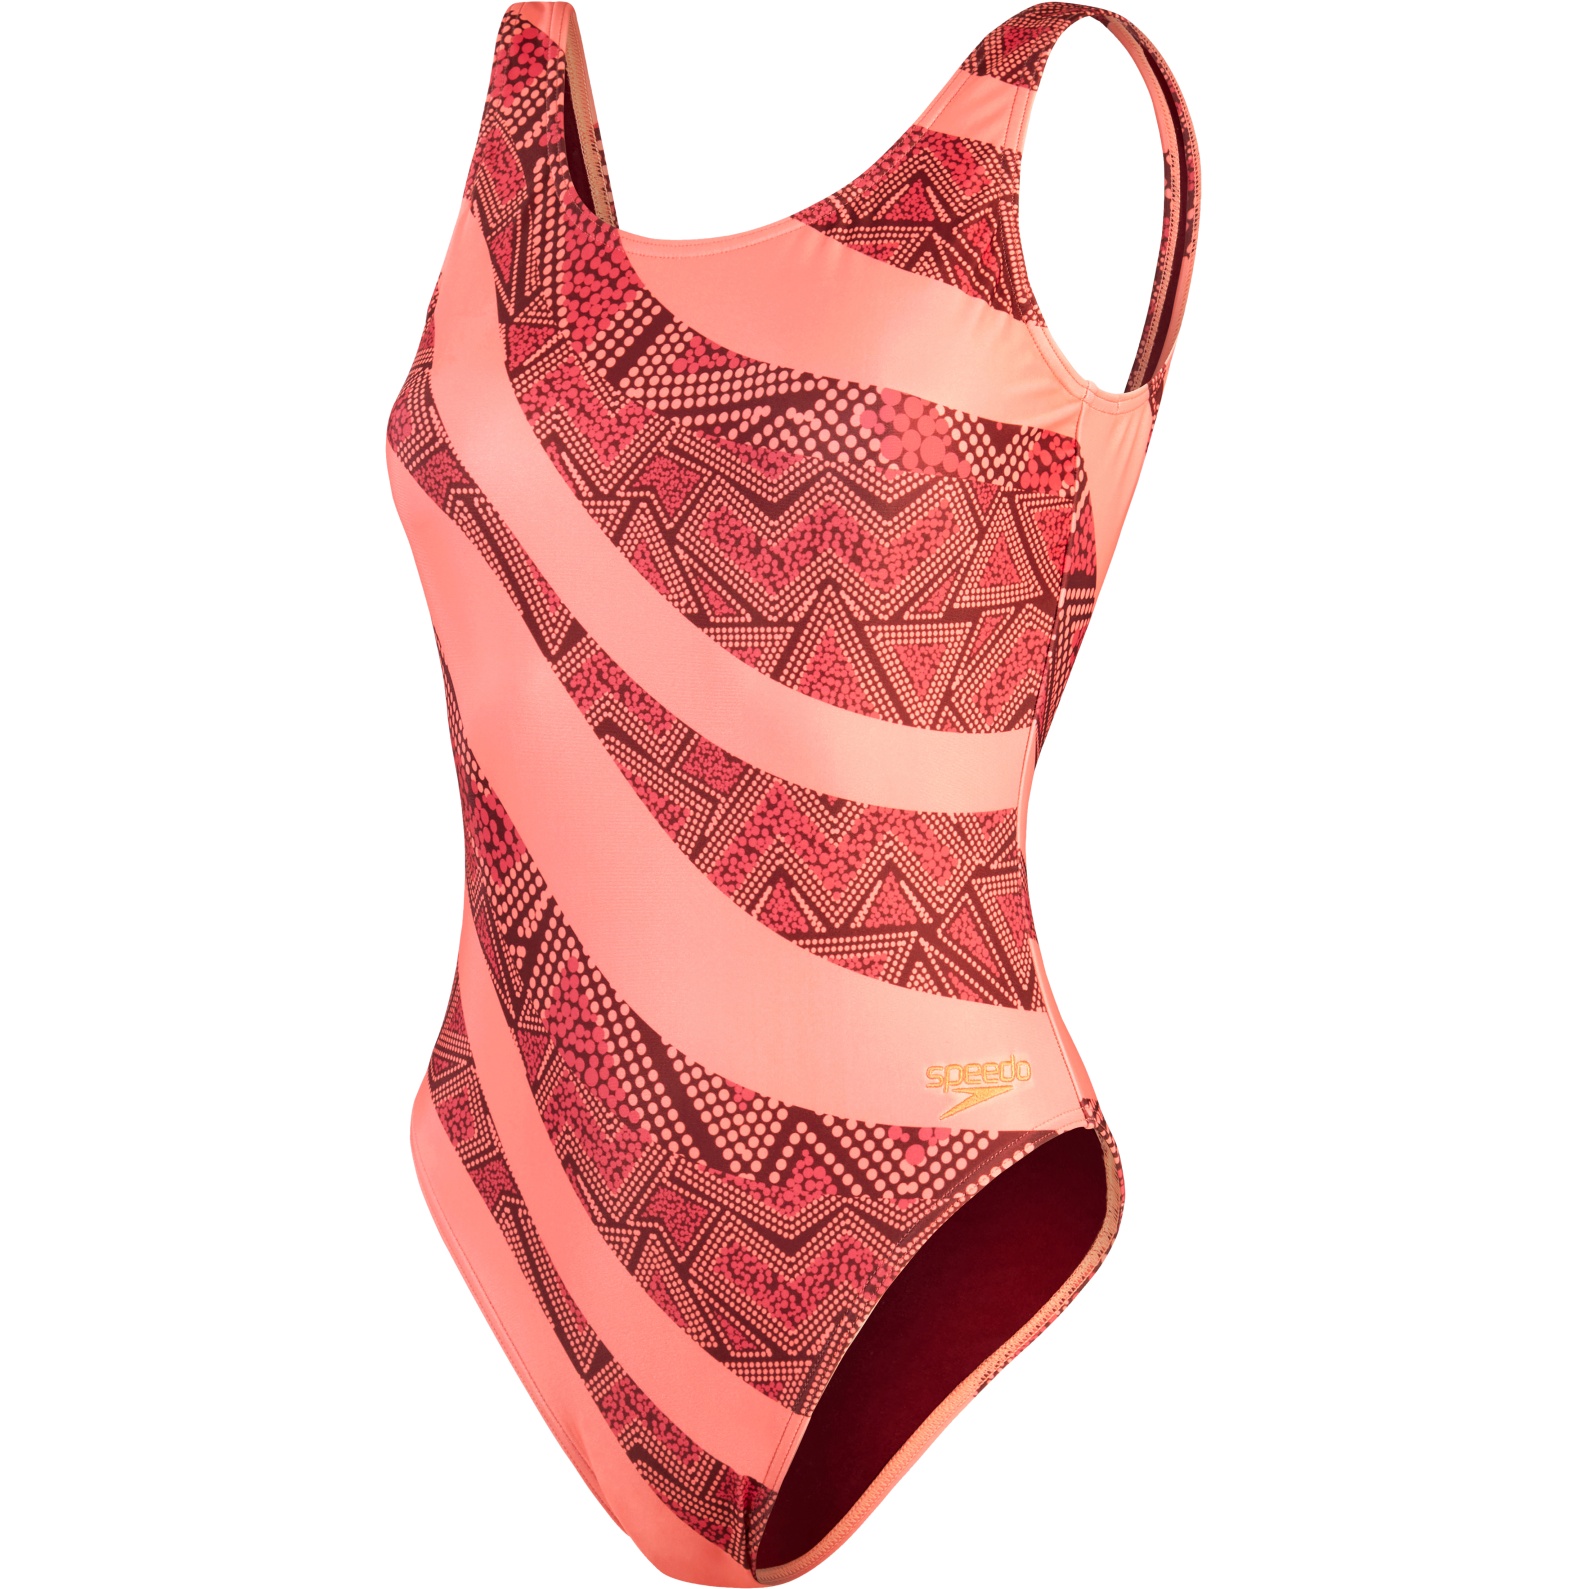 Picture of Speedo Printed Deep U-Back Bathing Suit Women - oxblood/soft coral